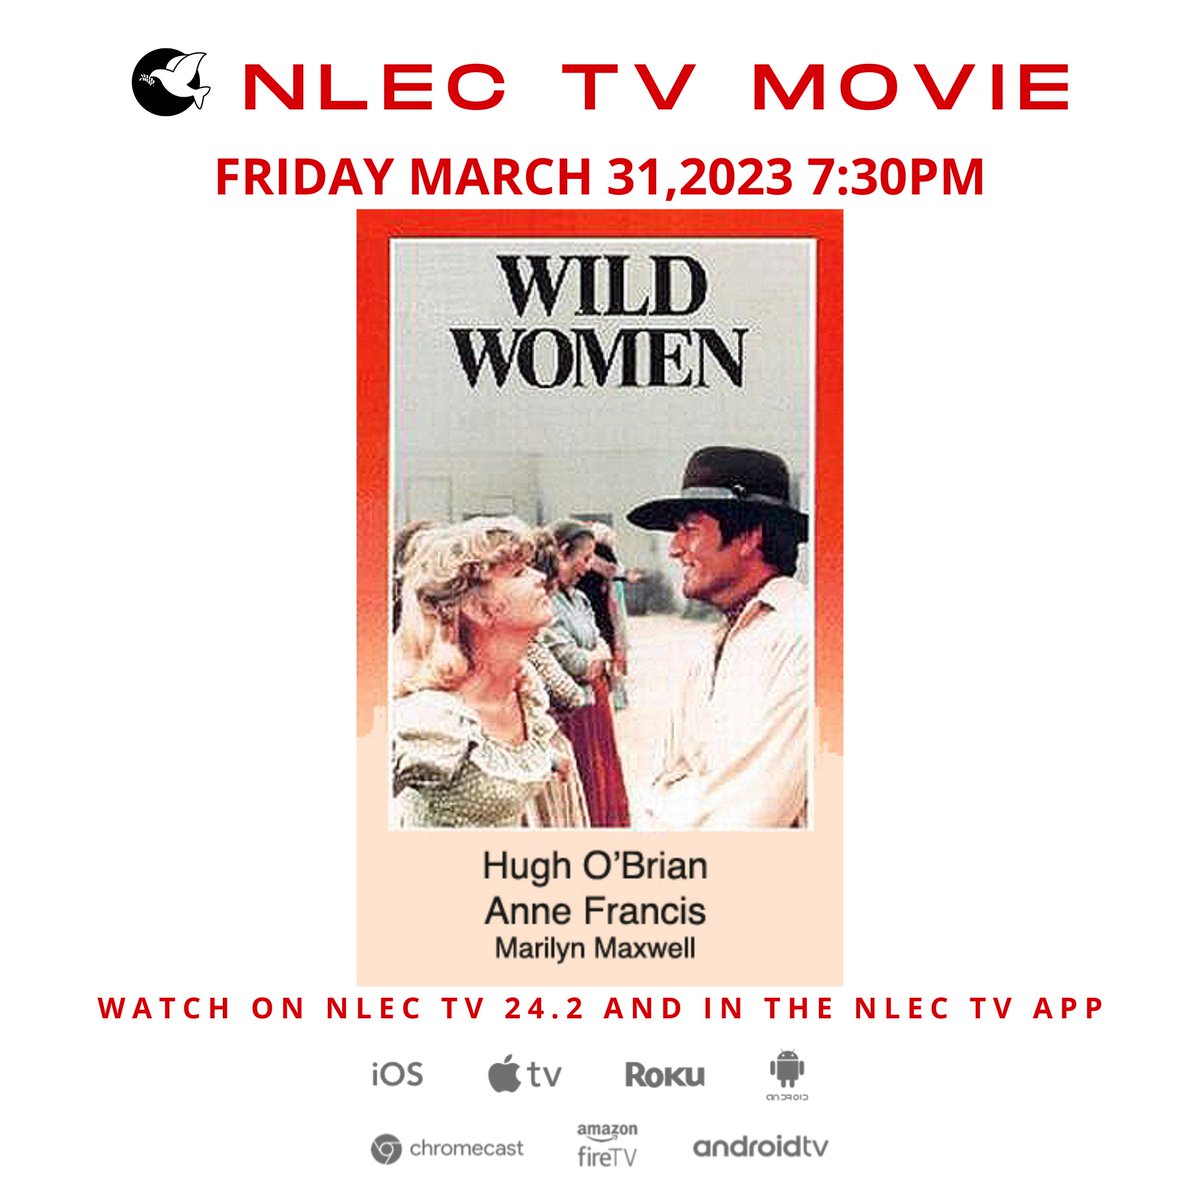 Five female convicts are recruited to secretly transport arms into Mexican-held Texas in 1840. #WildWomen #annefrancis #HughOBrian #actionadventure #westerns #westernmovie #westernmovies #tvmovie #TVmovies #classicmovie #classicmovies #movie #movies
nlec.tv/on-demand/nlec…